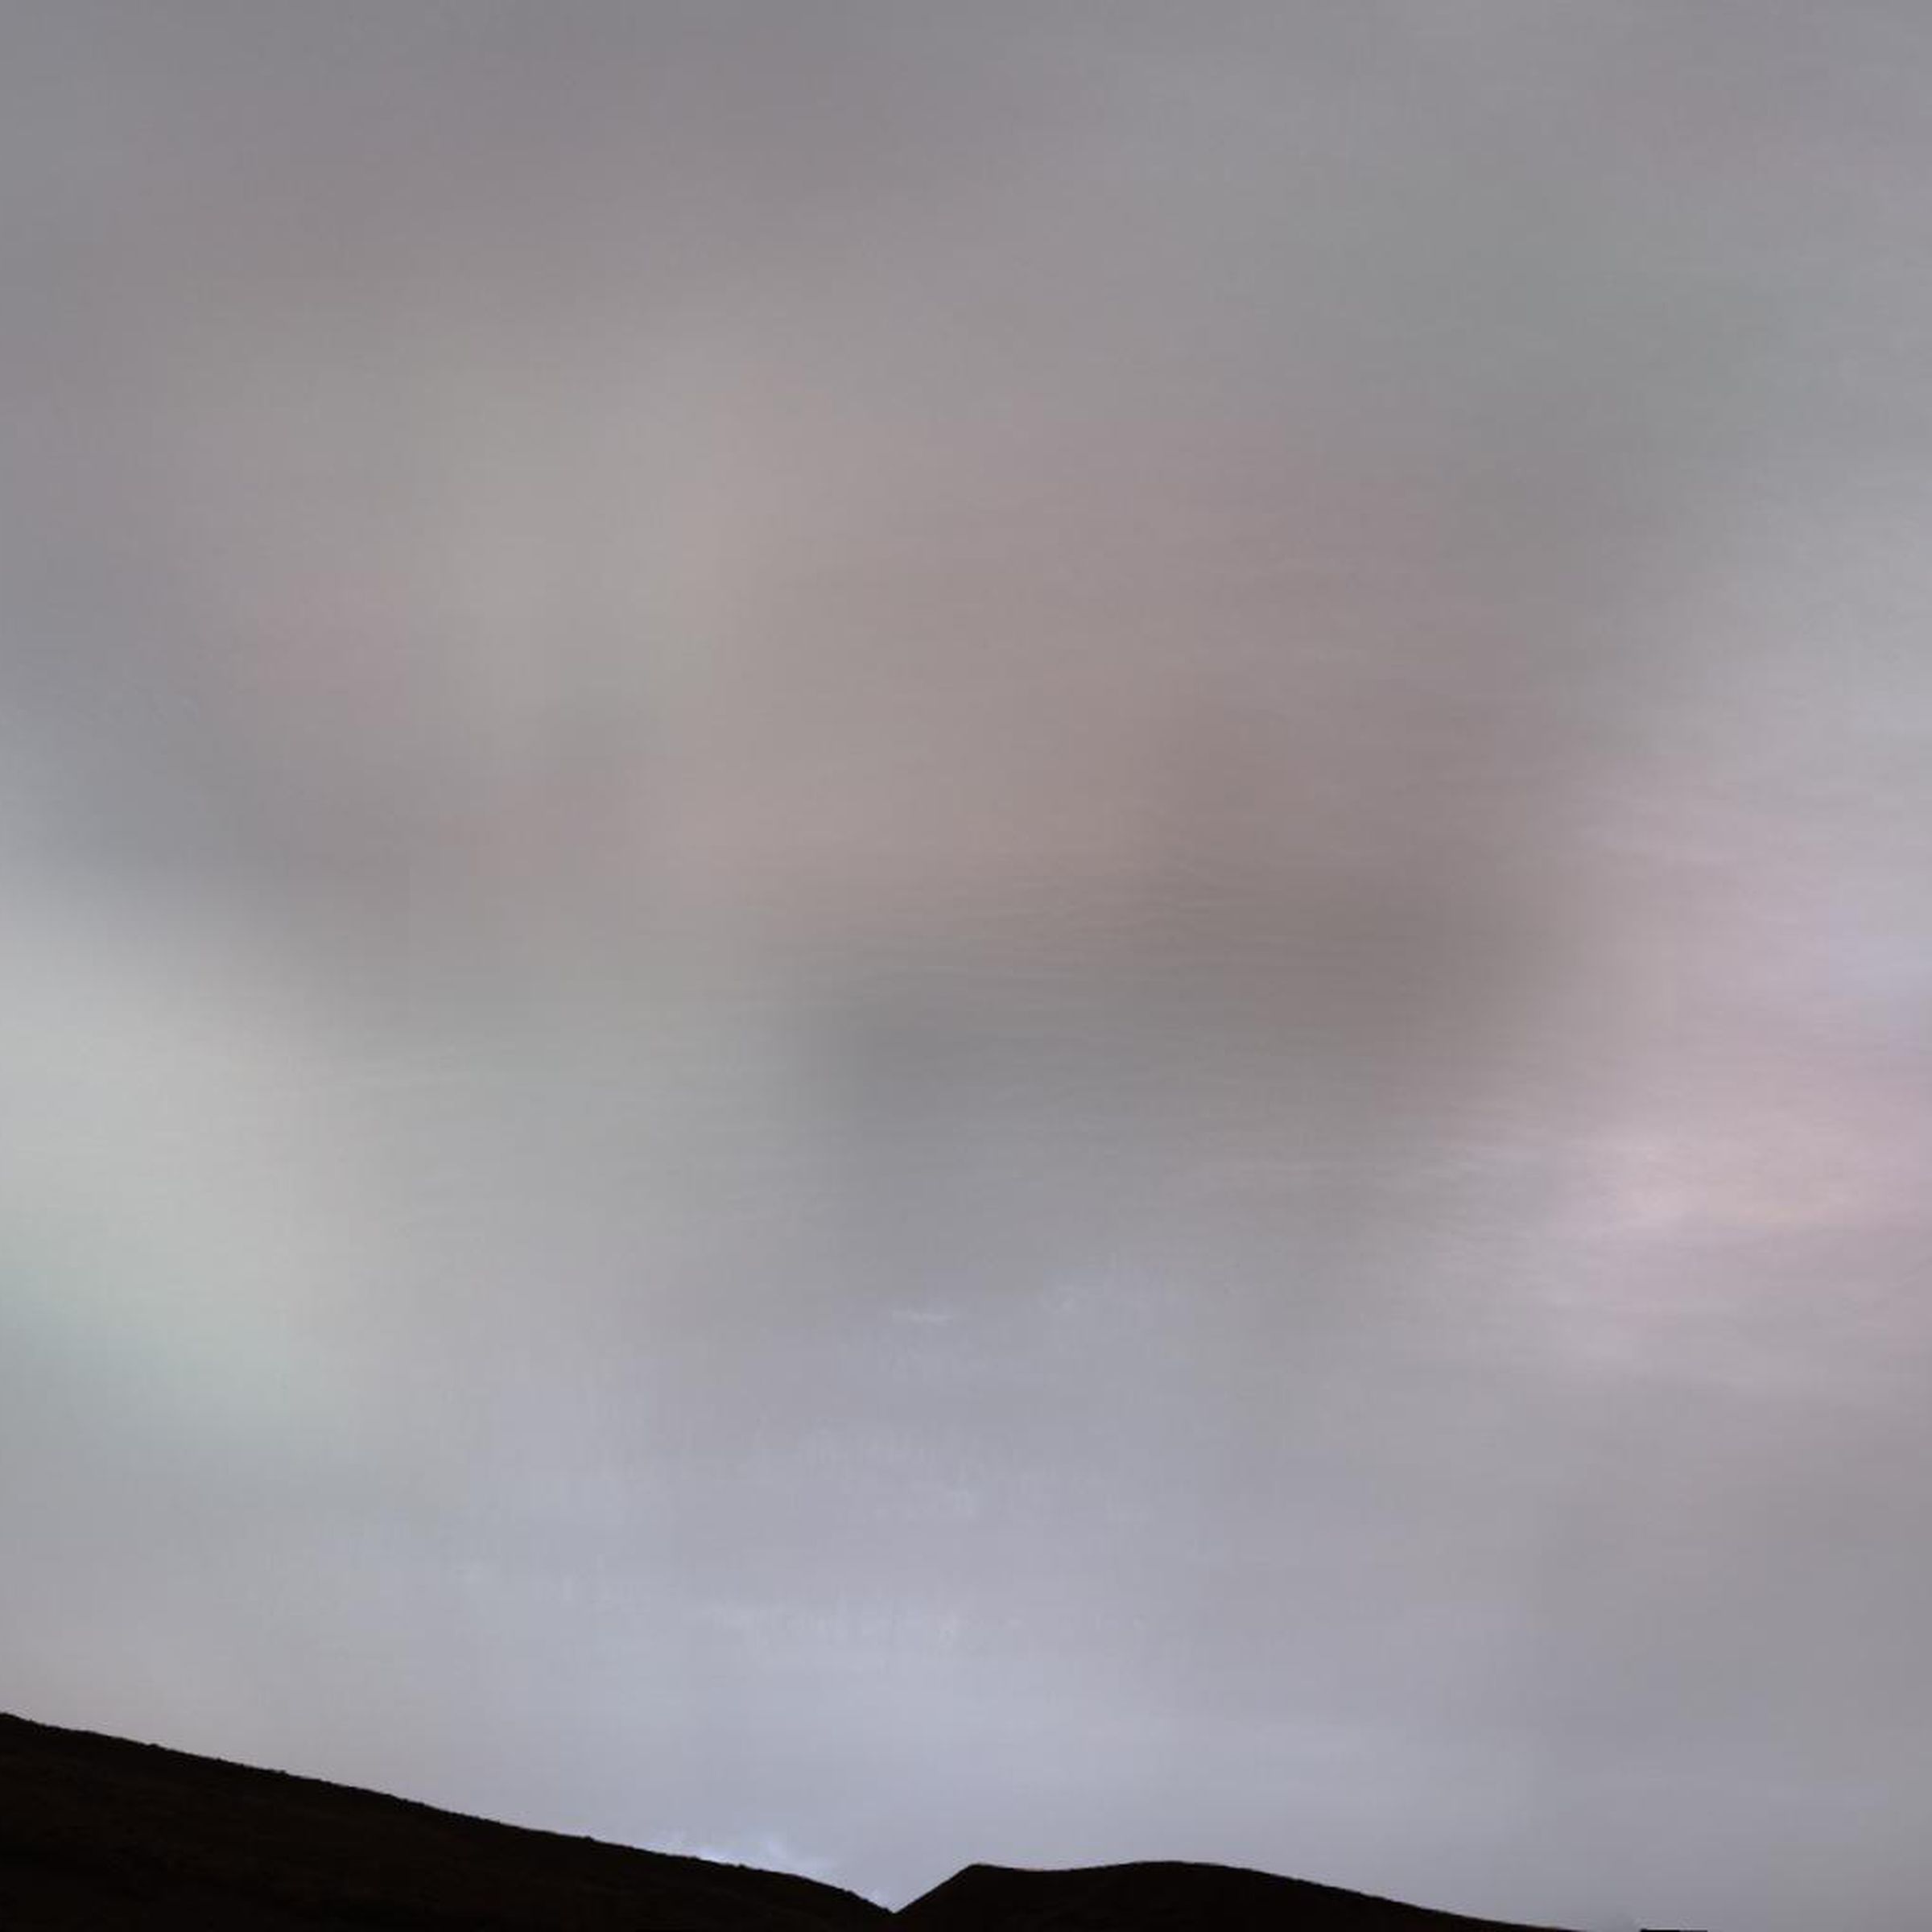 A sunset on Mars, as captured by the Curiosity rover